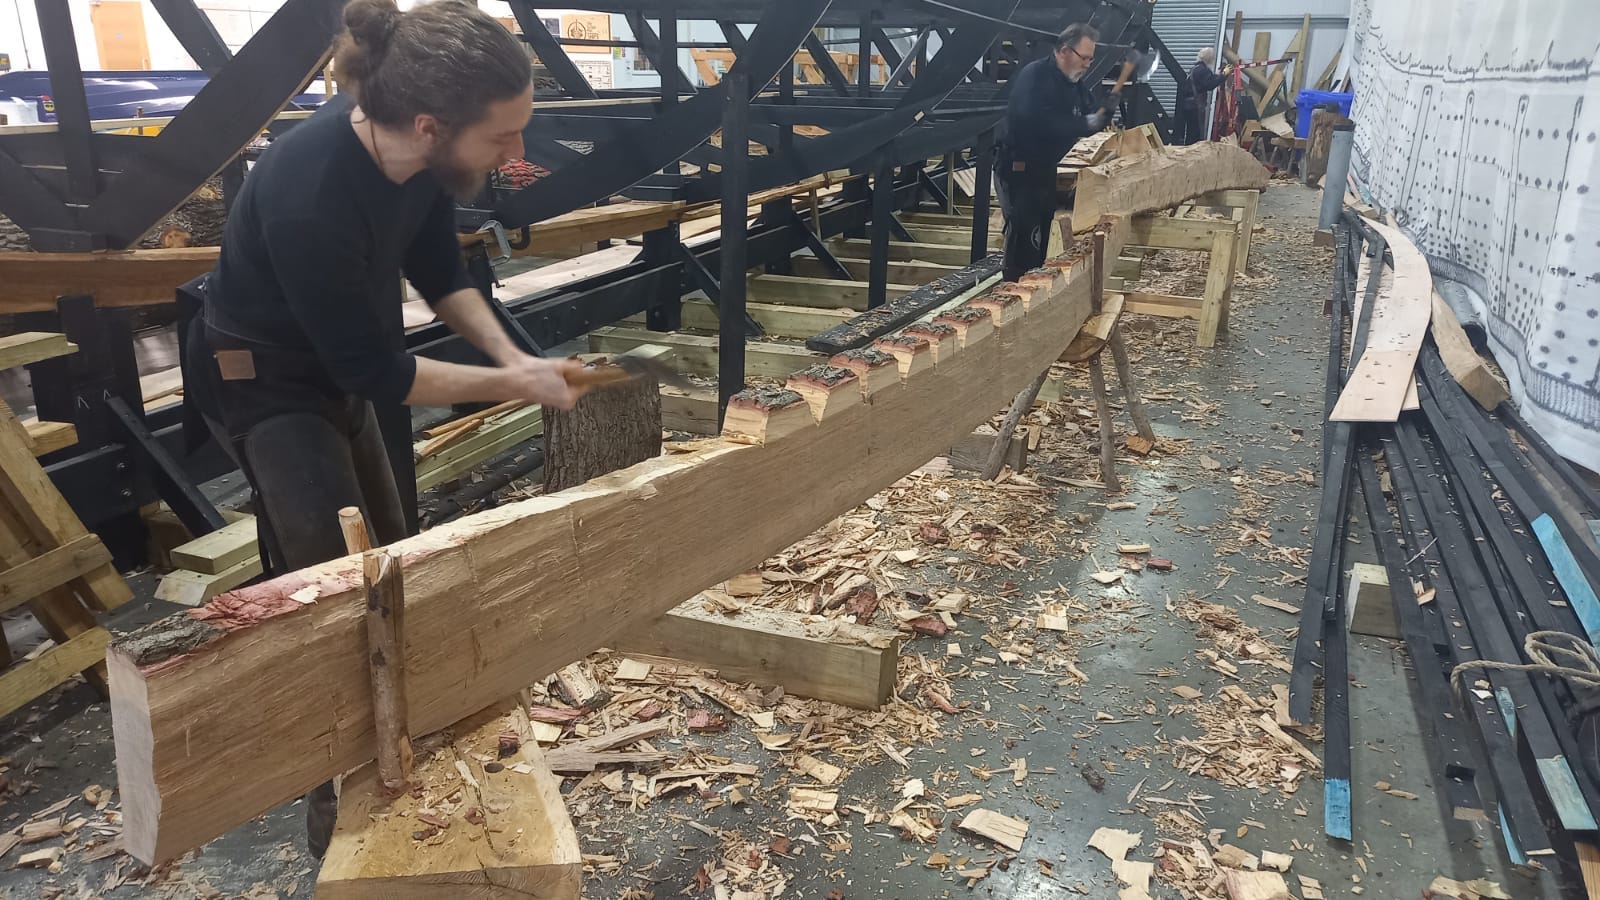 Alec Newland (foreground) and David MacDonald (background) hewing planks from cleaved logs